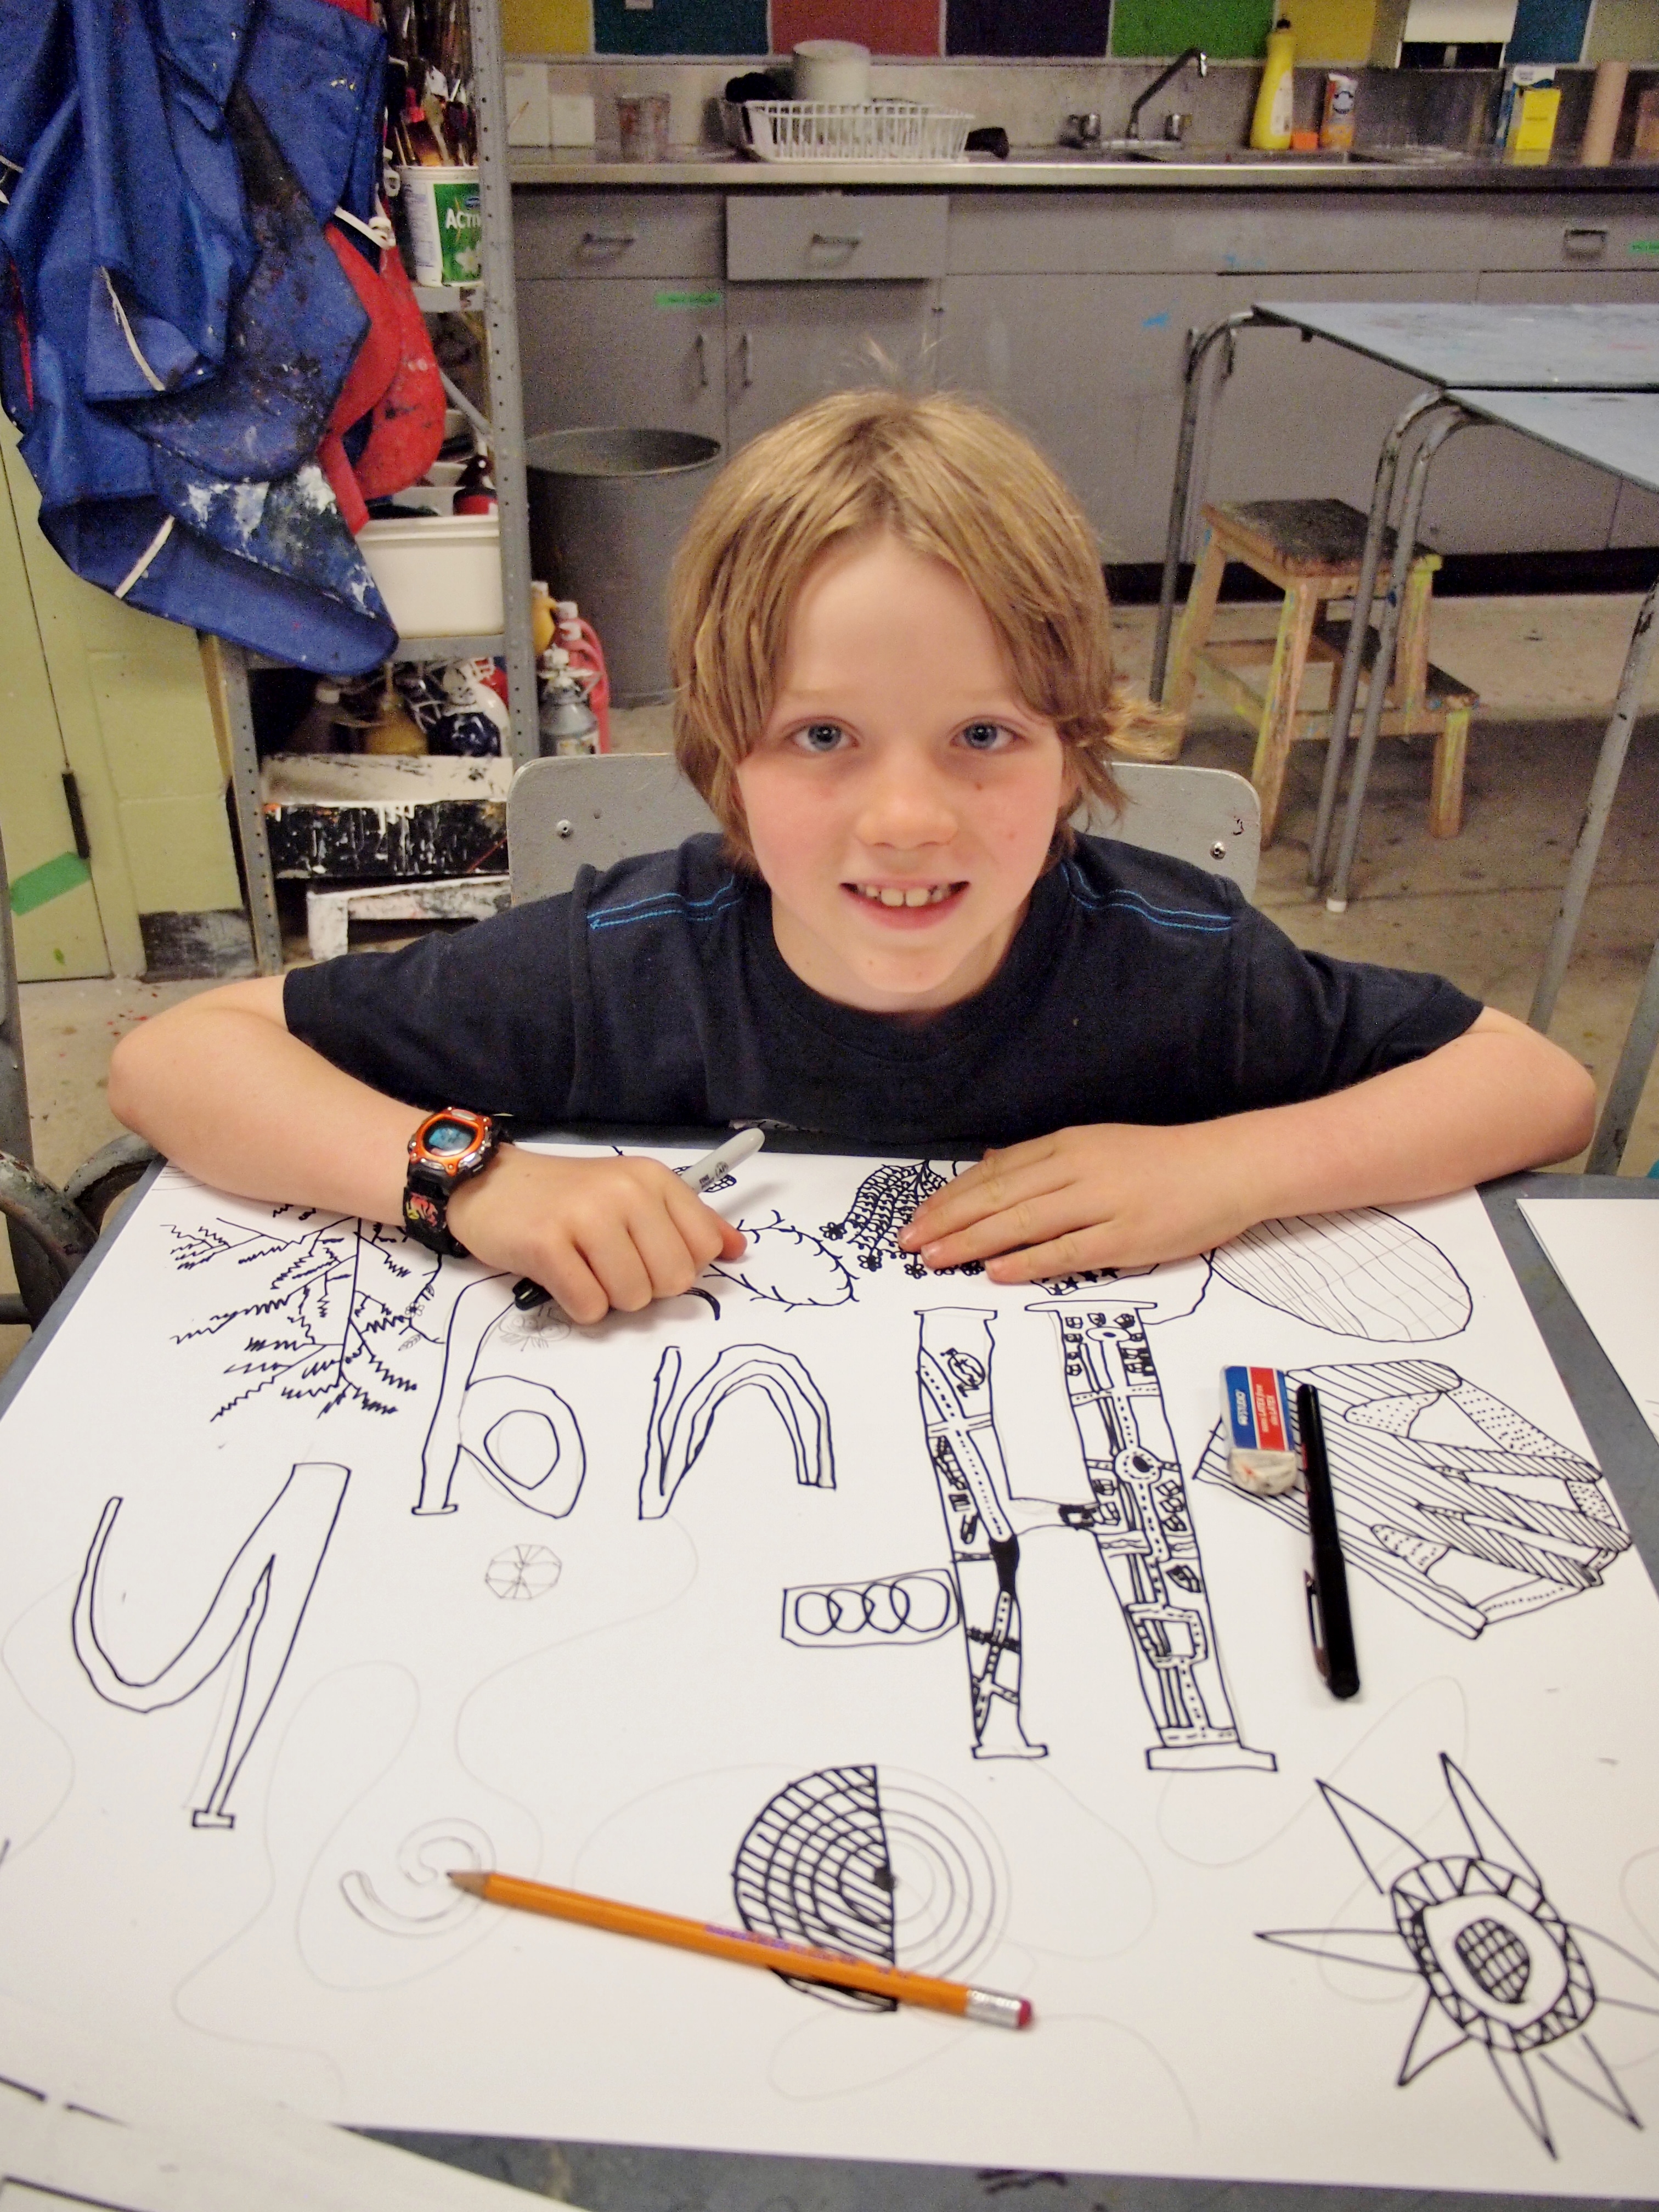 A young child with short blond hair sits at a table looking up from a large black marker drawing of intricate letter shapes